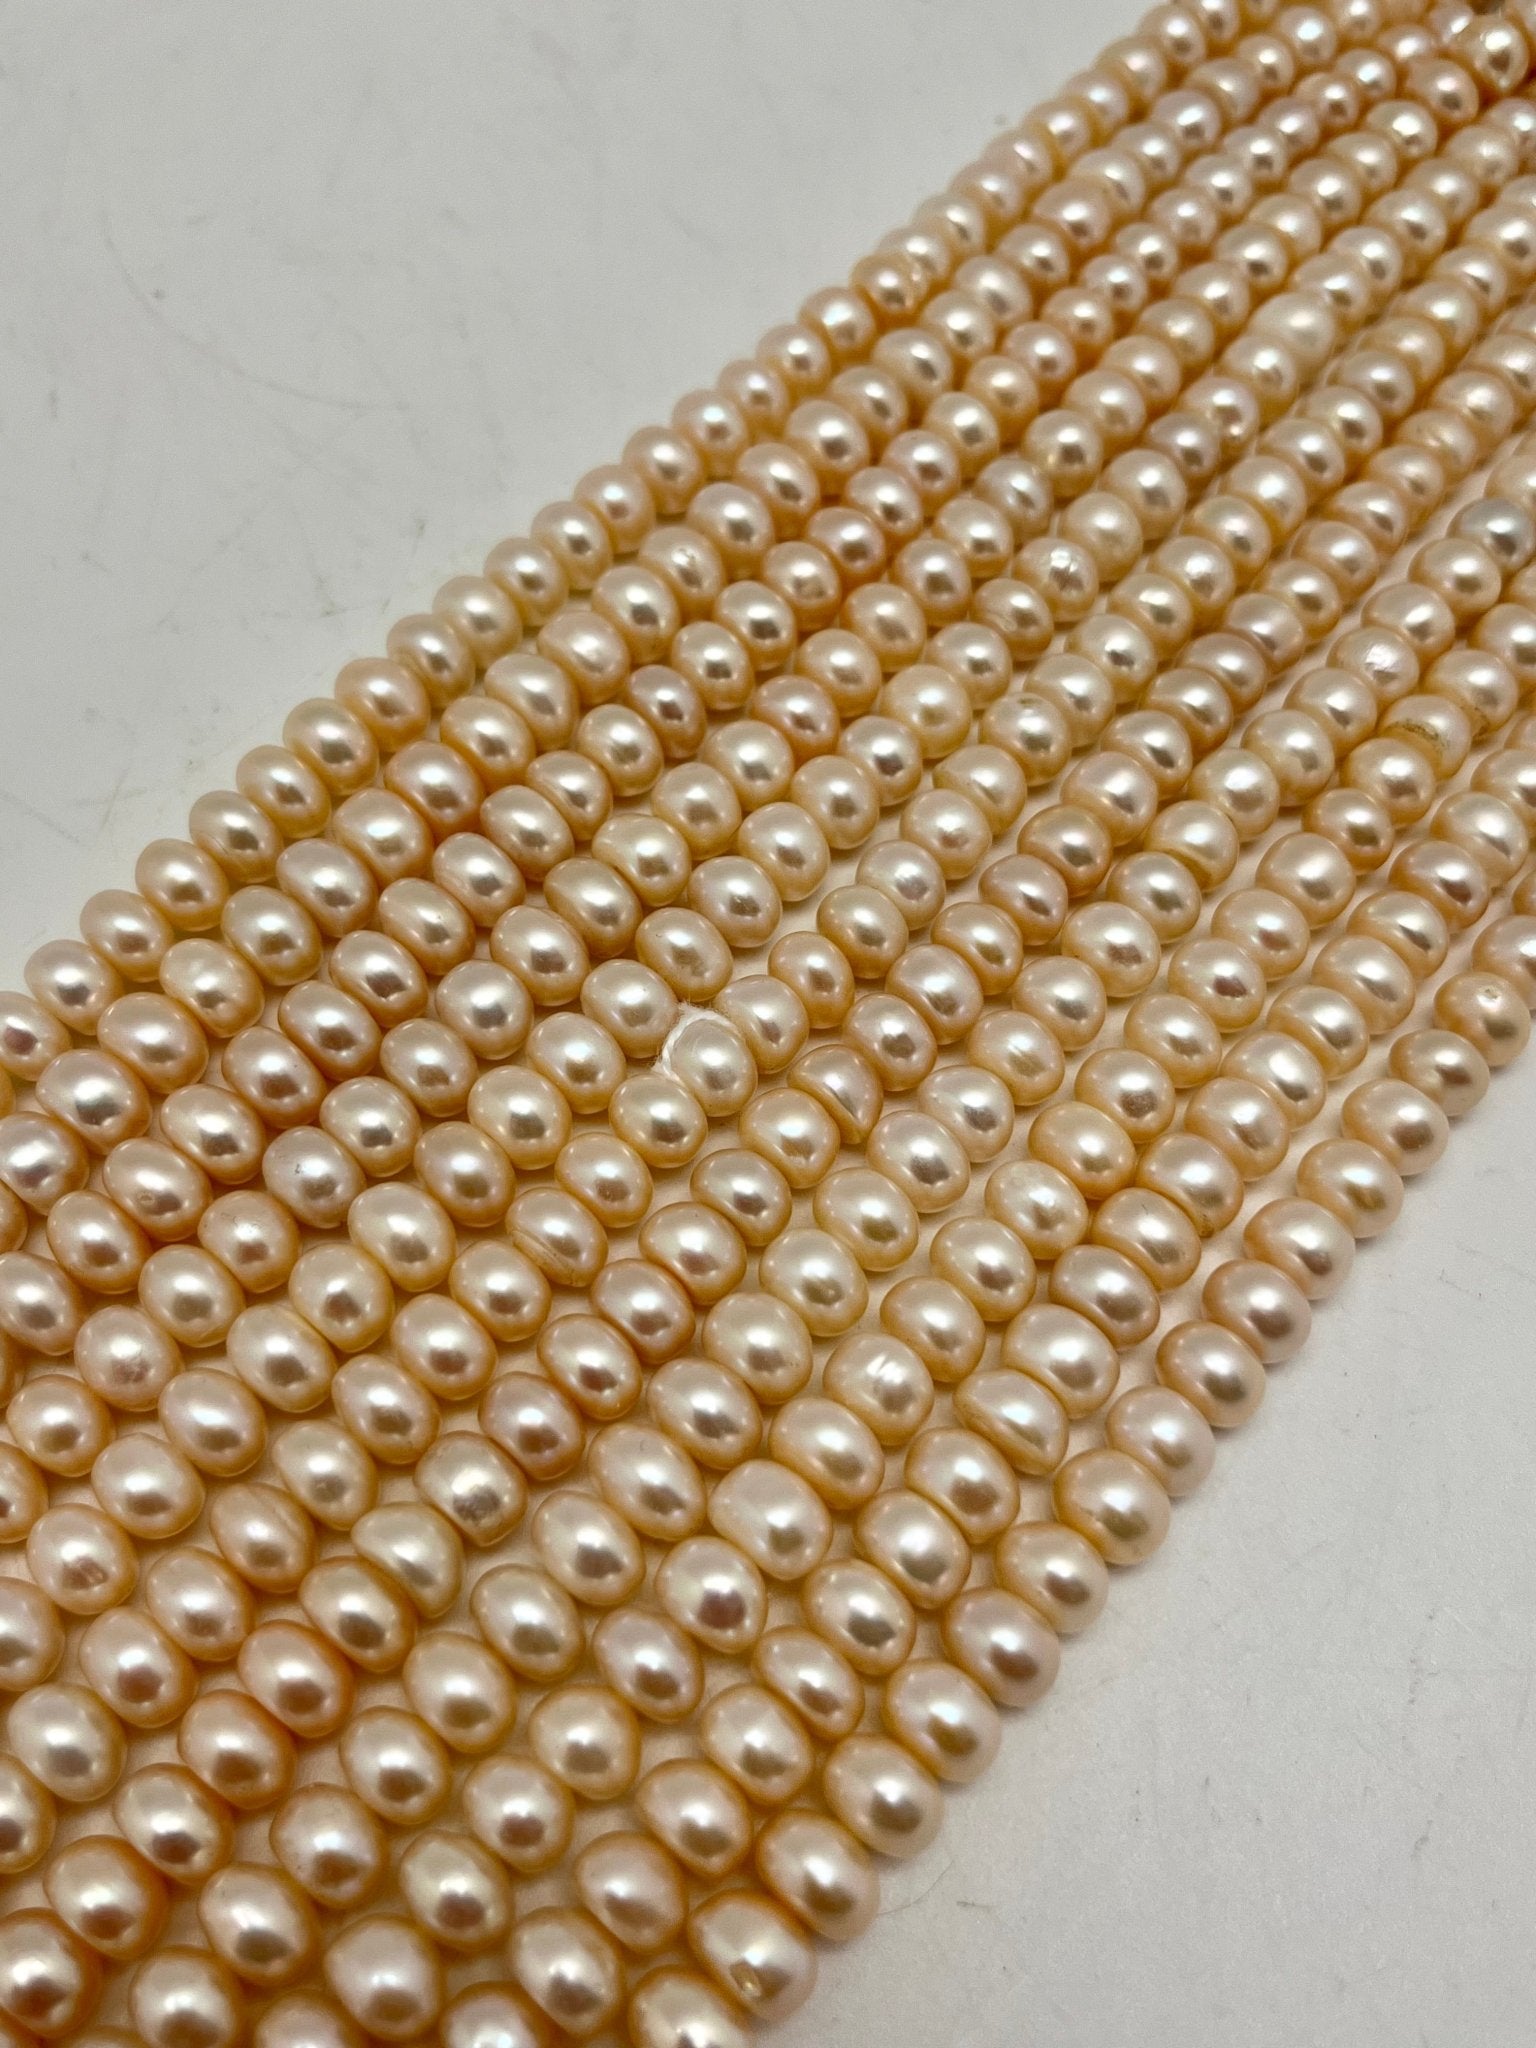 RESEN 8mm 100pcs Sew On Pearls Jelly Color With Gold/Sliver Claw Acrylic  Round Pearl Button